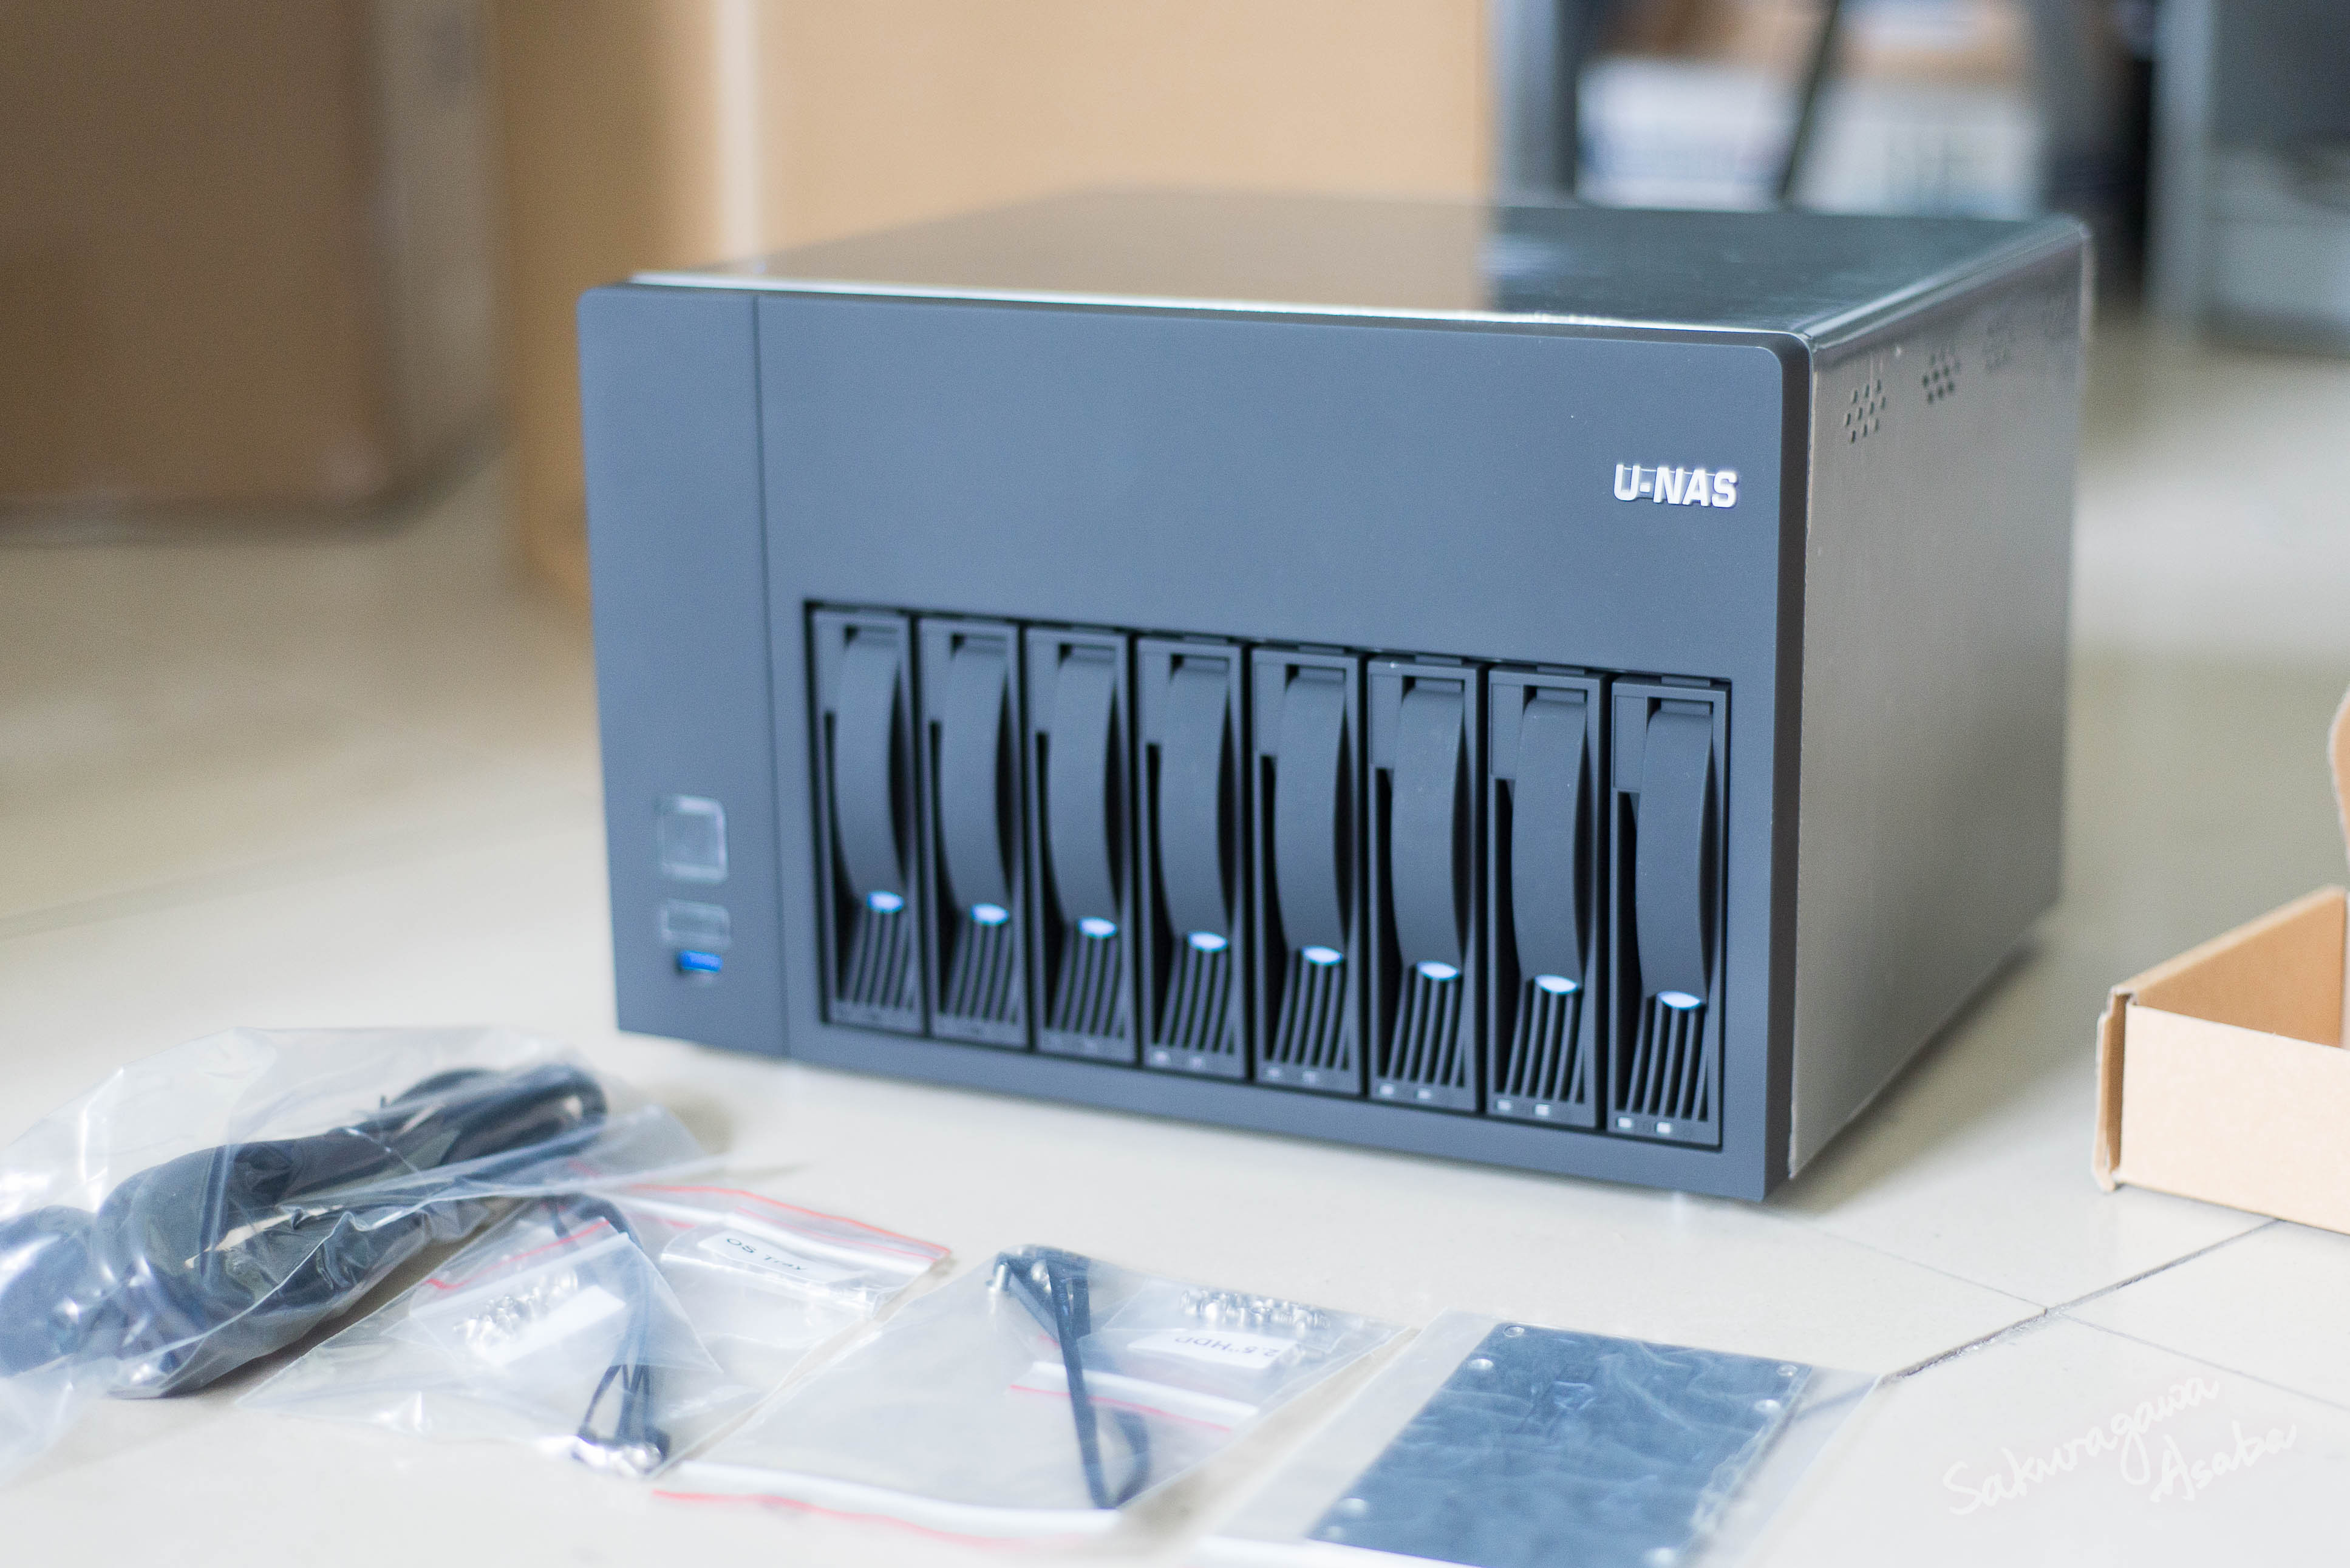 U-NAS NSC-810A chassis and accessories